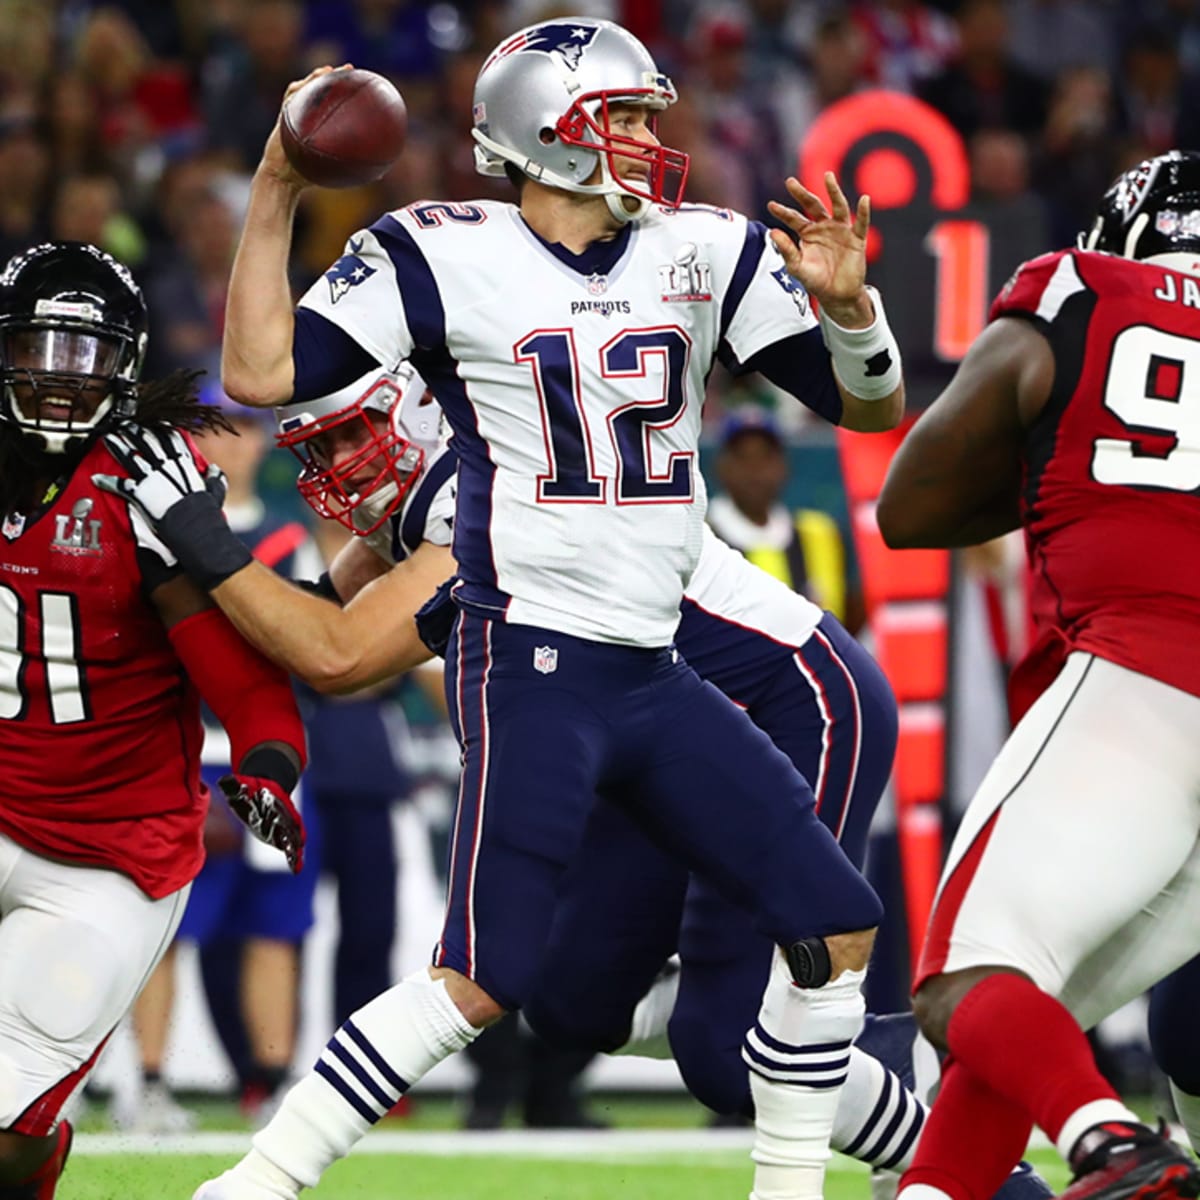 Queen Restriction extinction Tom Brady cements place in history with SB LI comeback - Sports Illustrated